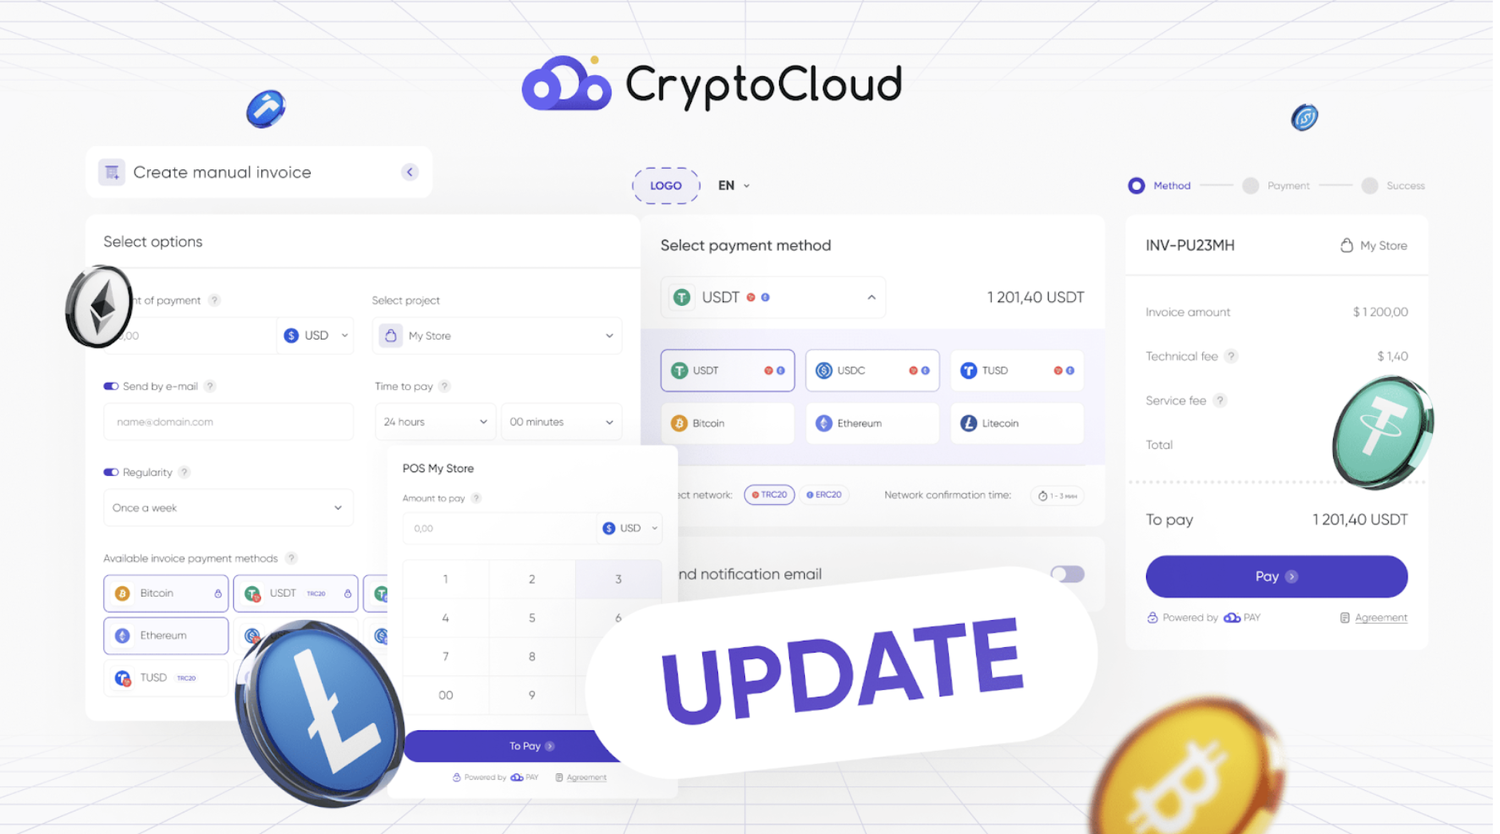 Payment Gateway CryptoCloud Announced New Service Features